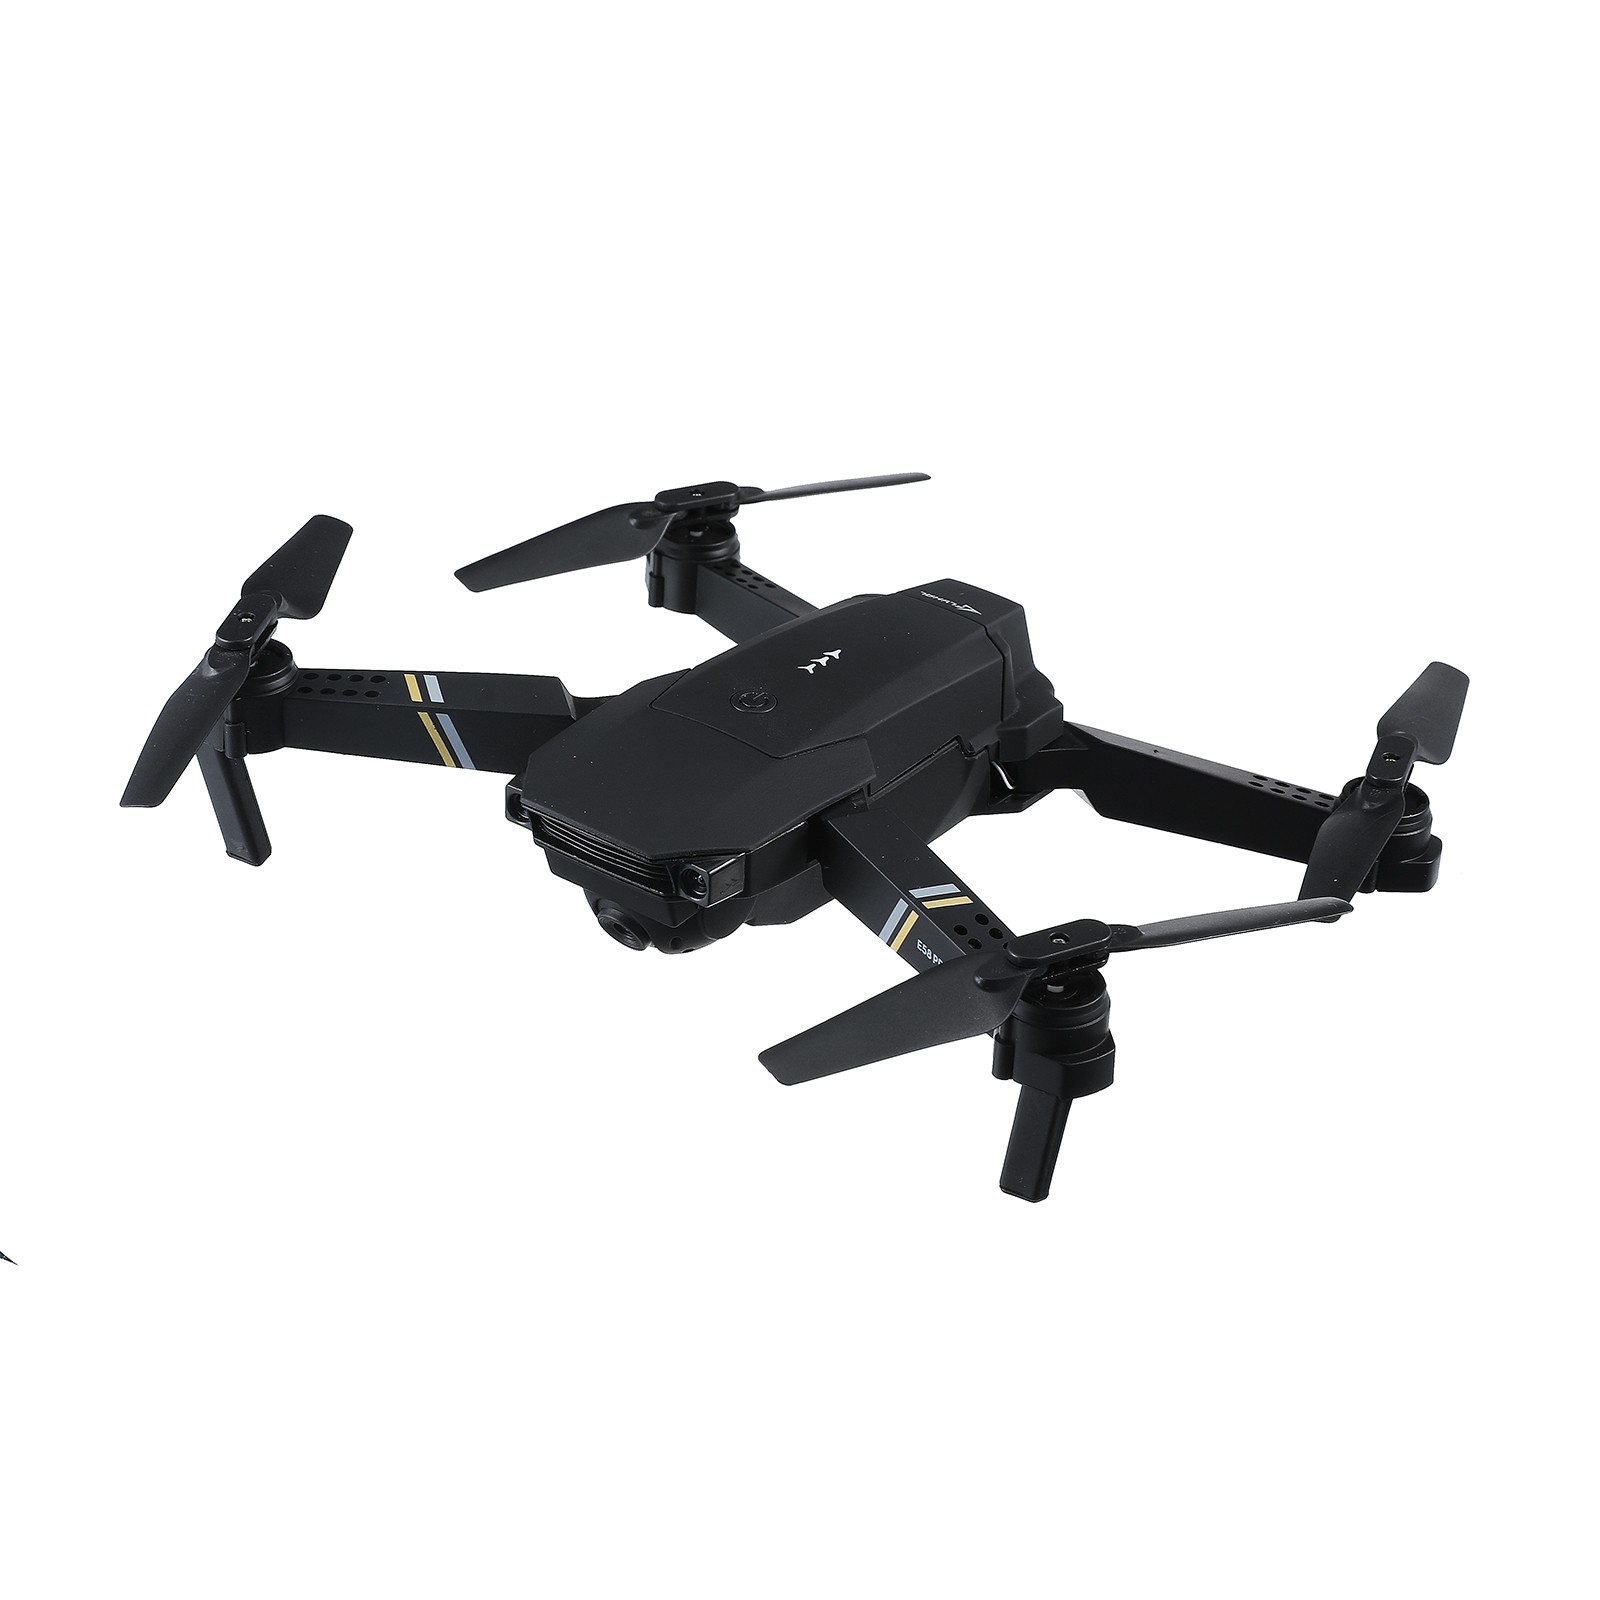 Find FLYHAL E58 PRO WIFI FPV With 120 FOV 1080P HD Camera Adjustment Angle High Hold Mode Foldable RC Drone Quadcopter RTF for Sale on Gipsybee.com with cryptocurrencies